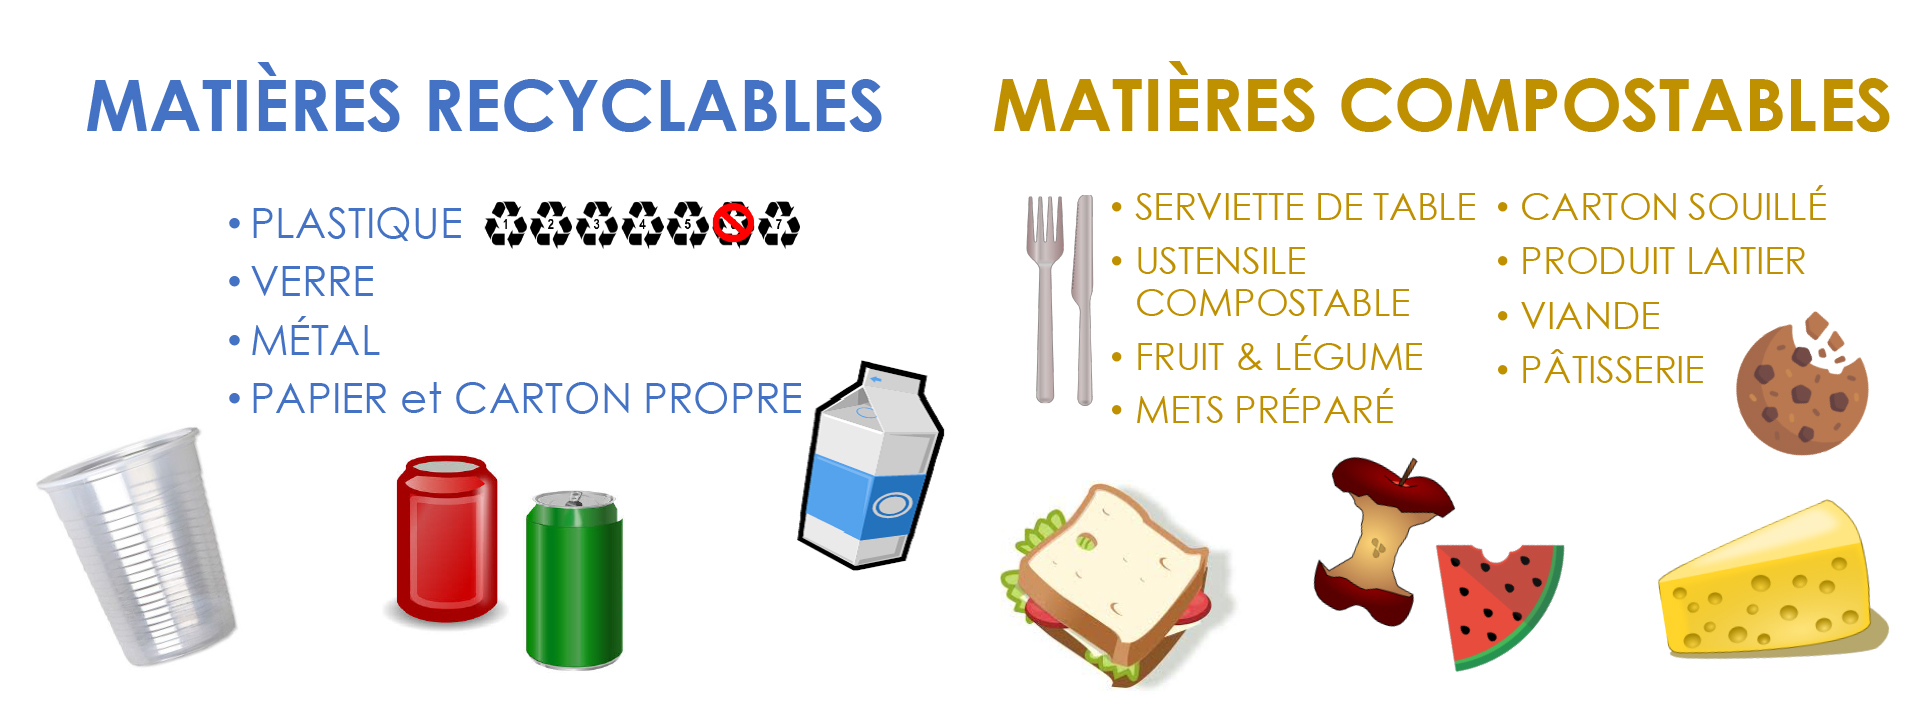 affiches_matieres_recyclables_compostables